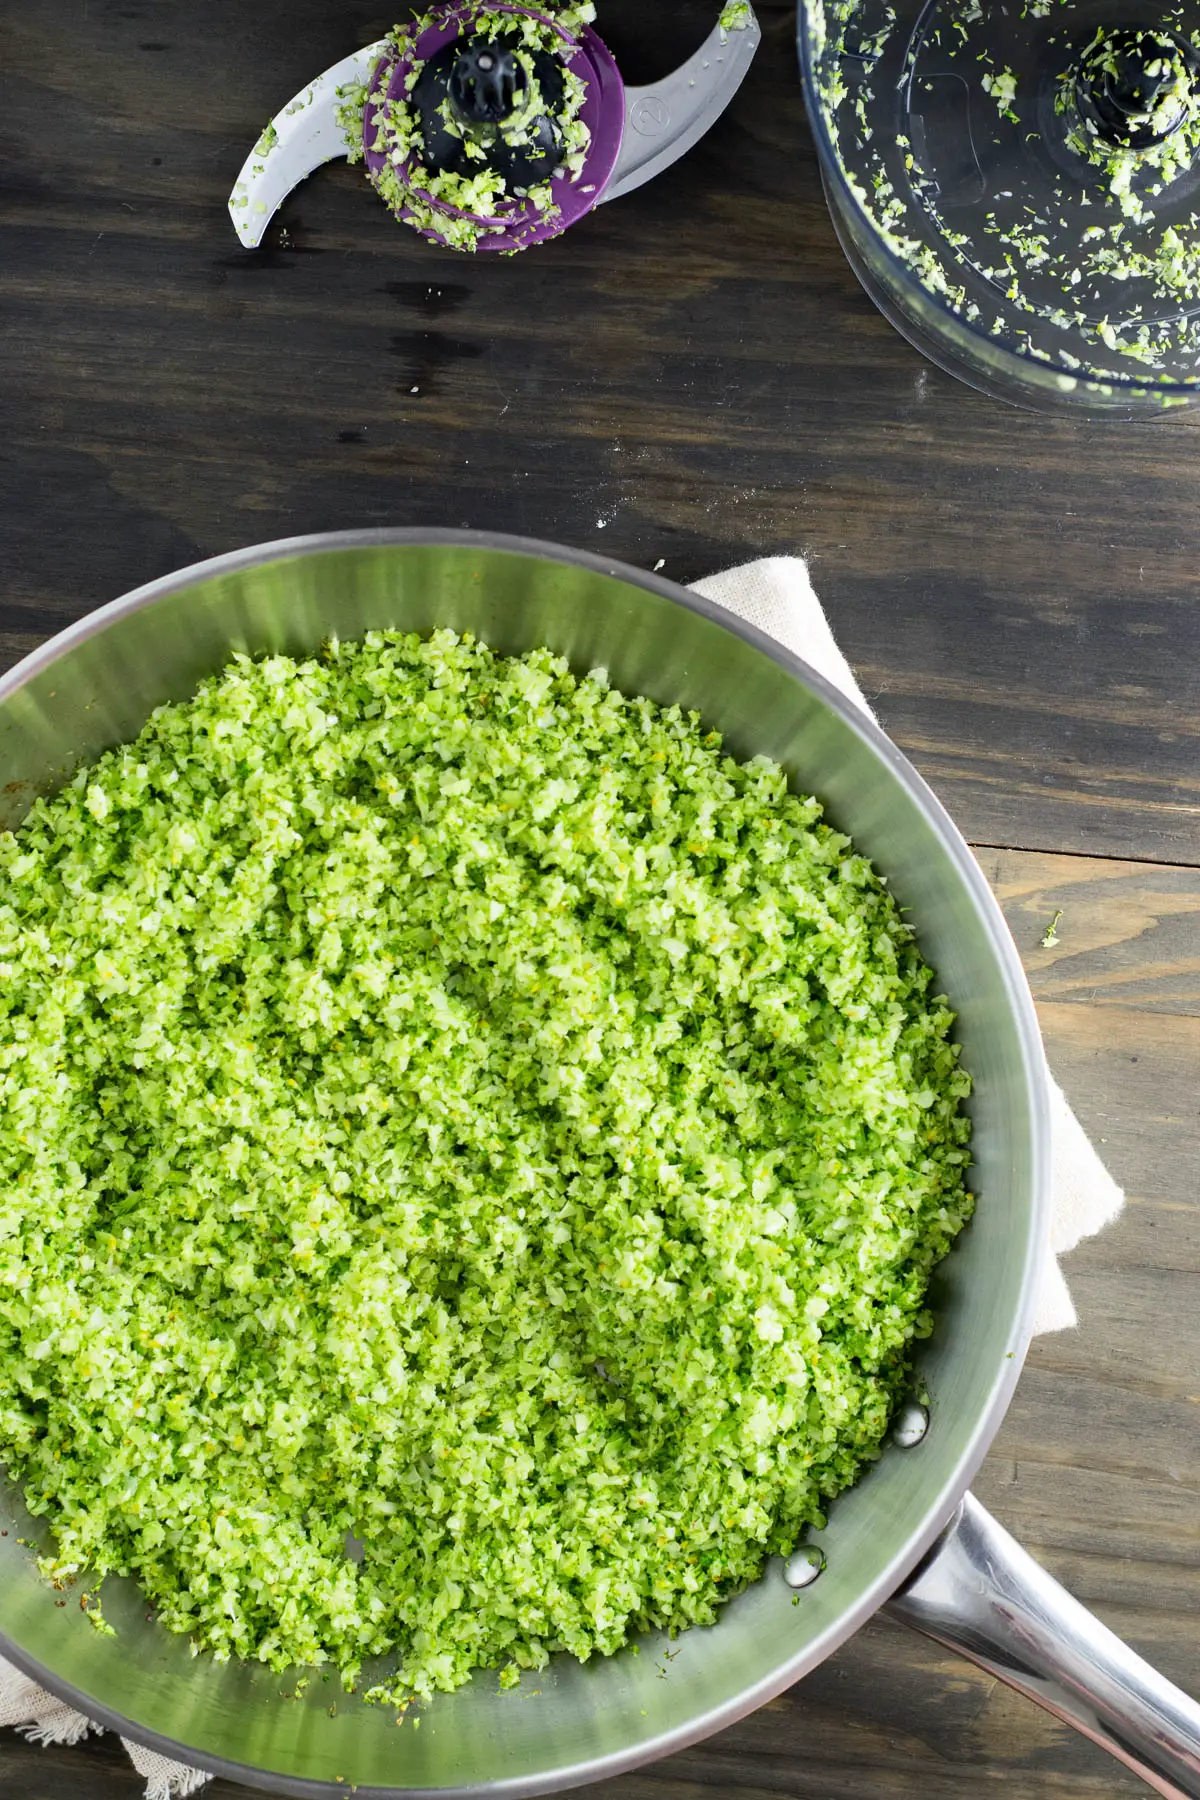 How to Make Broccoli Rice - Broccoli Couscous